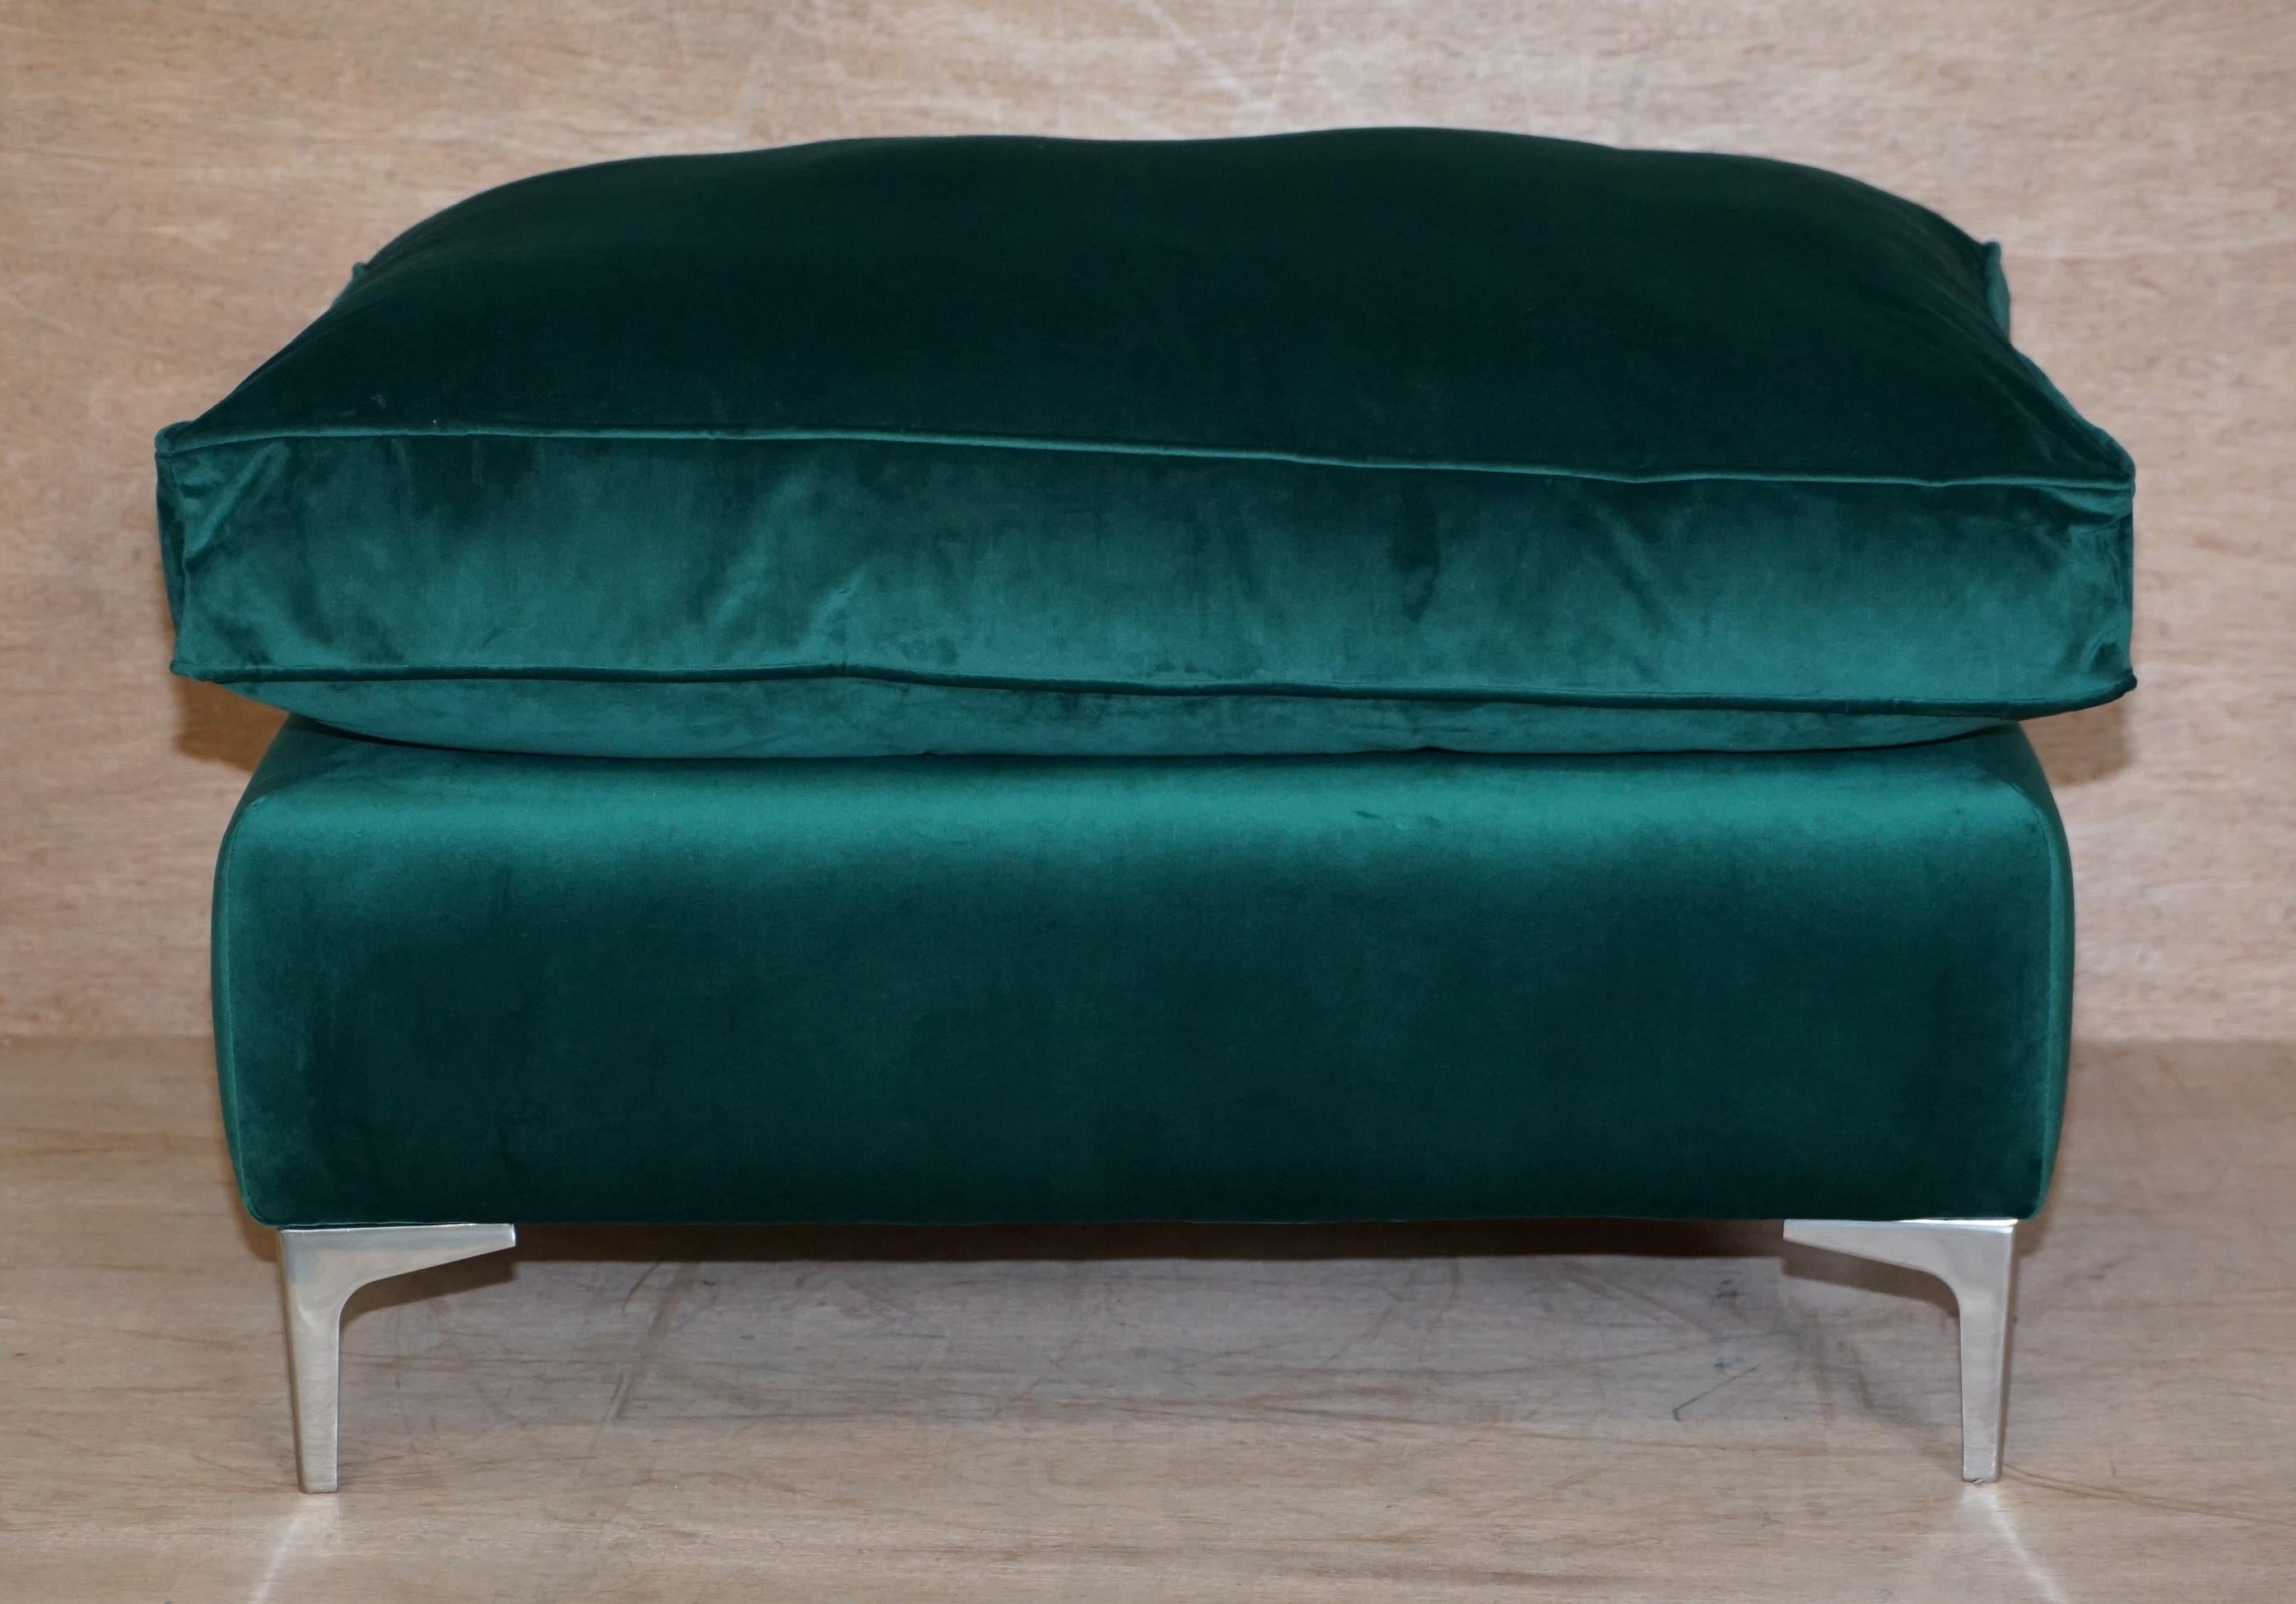 Royal House Antiques

Royal House Antiques is delighted to this stunning large Perfect Furniture Collections LTD green velvet oversized ottoman footstool or bench

A very good looking well made and comfortable stool, upholstered in Emerald green